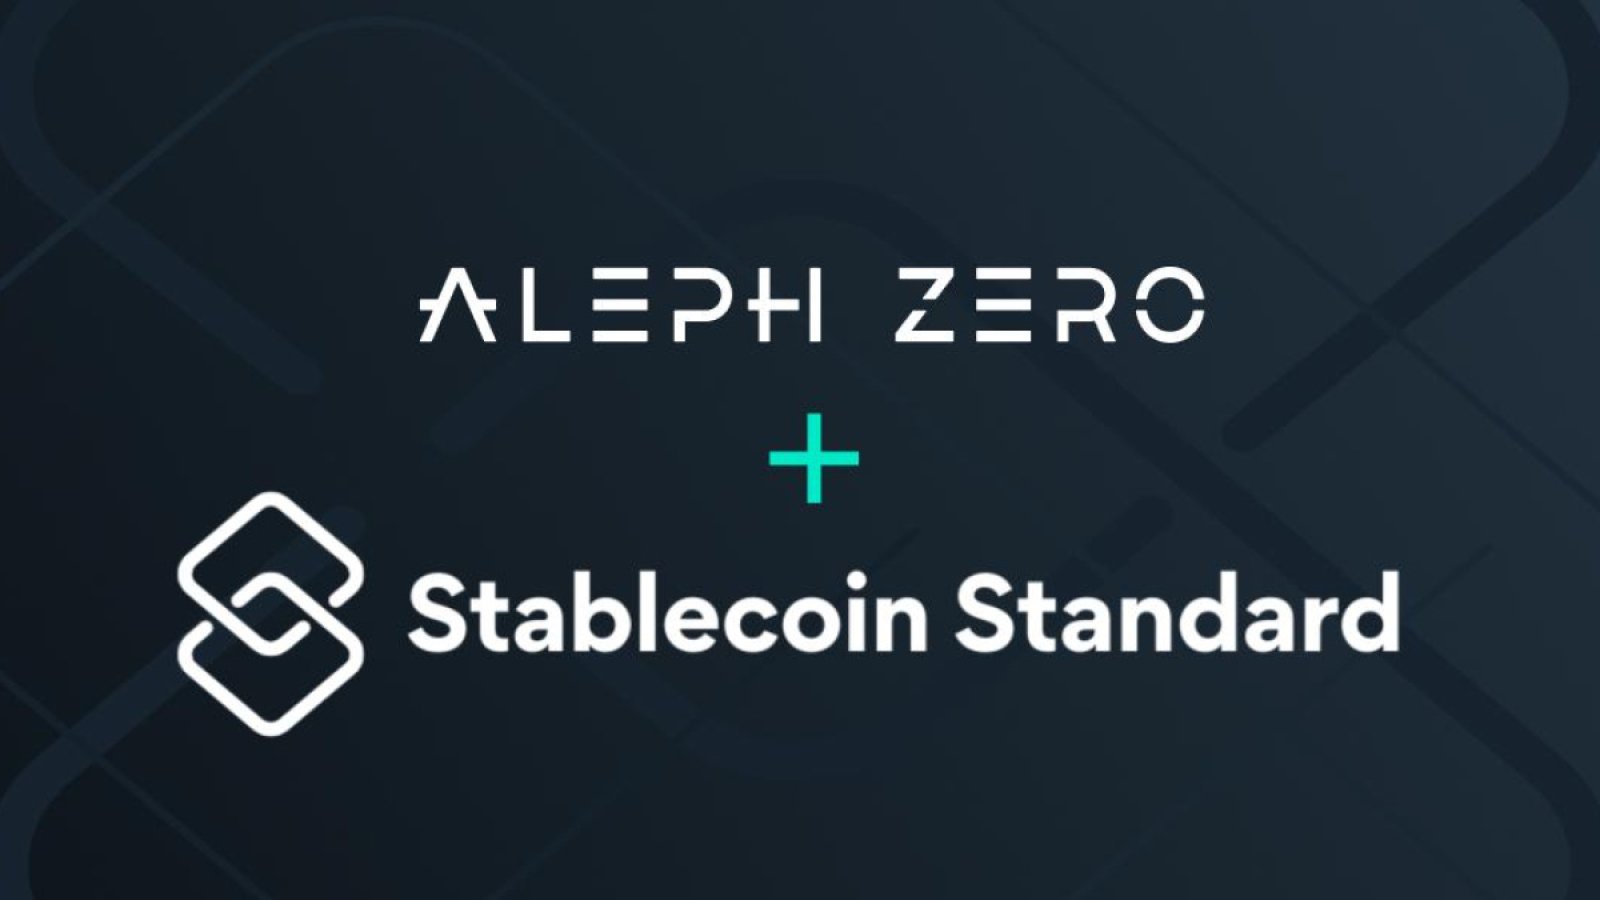 Stablecoin Standard and Aleph Zero Announce Strategic Partnership to Facilitate the Future of On-Chain Commerce